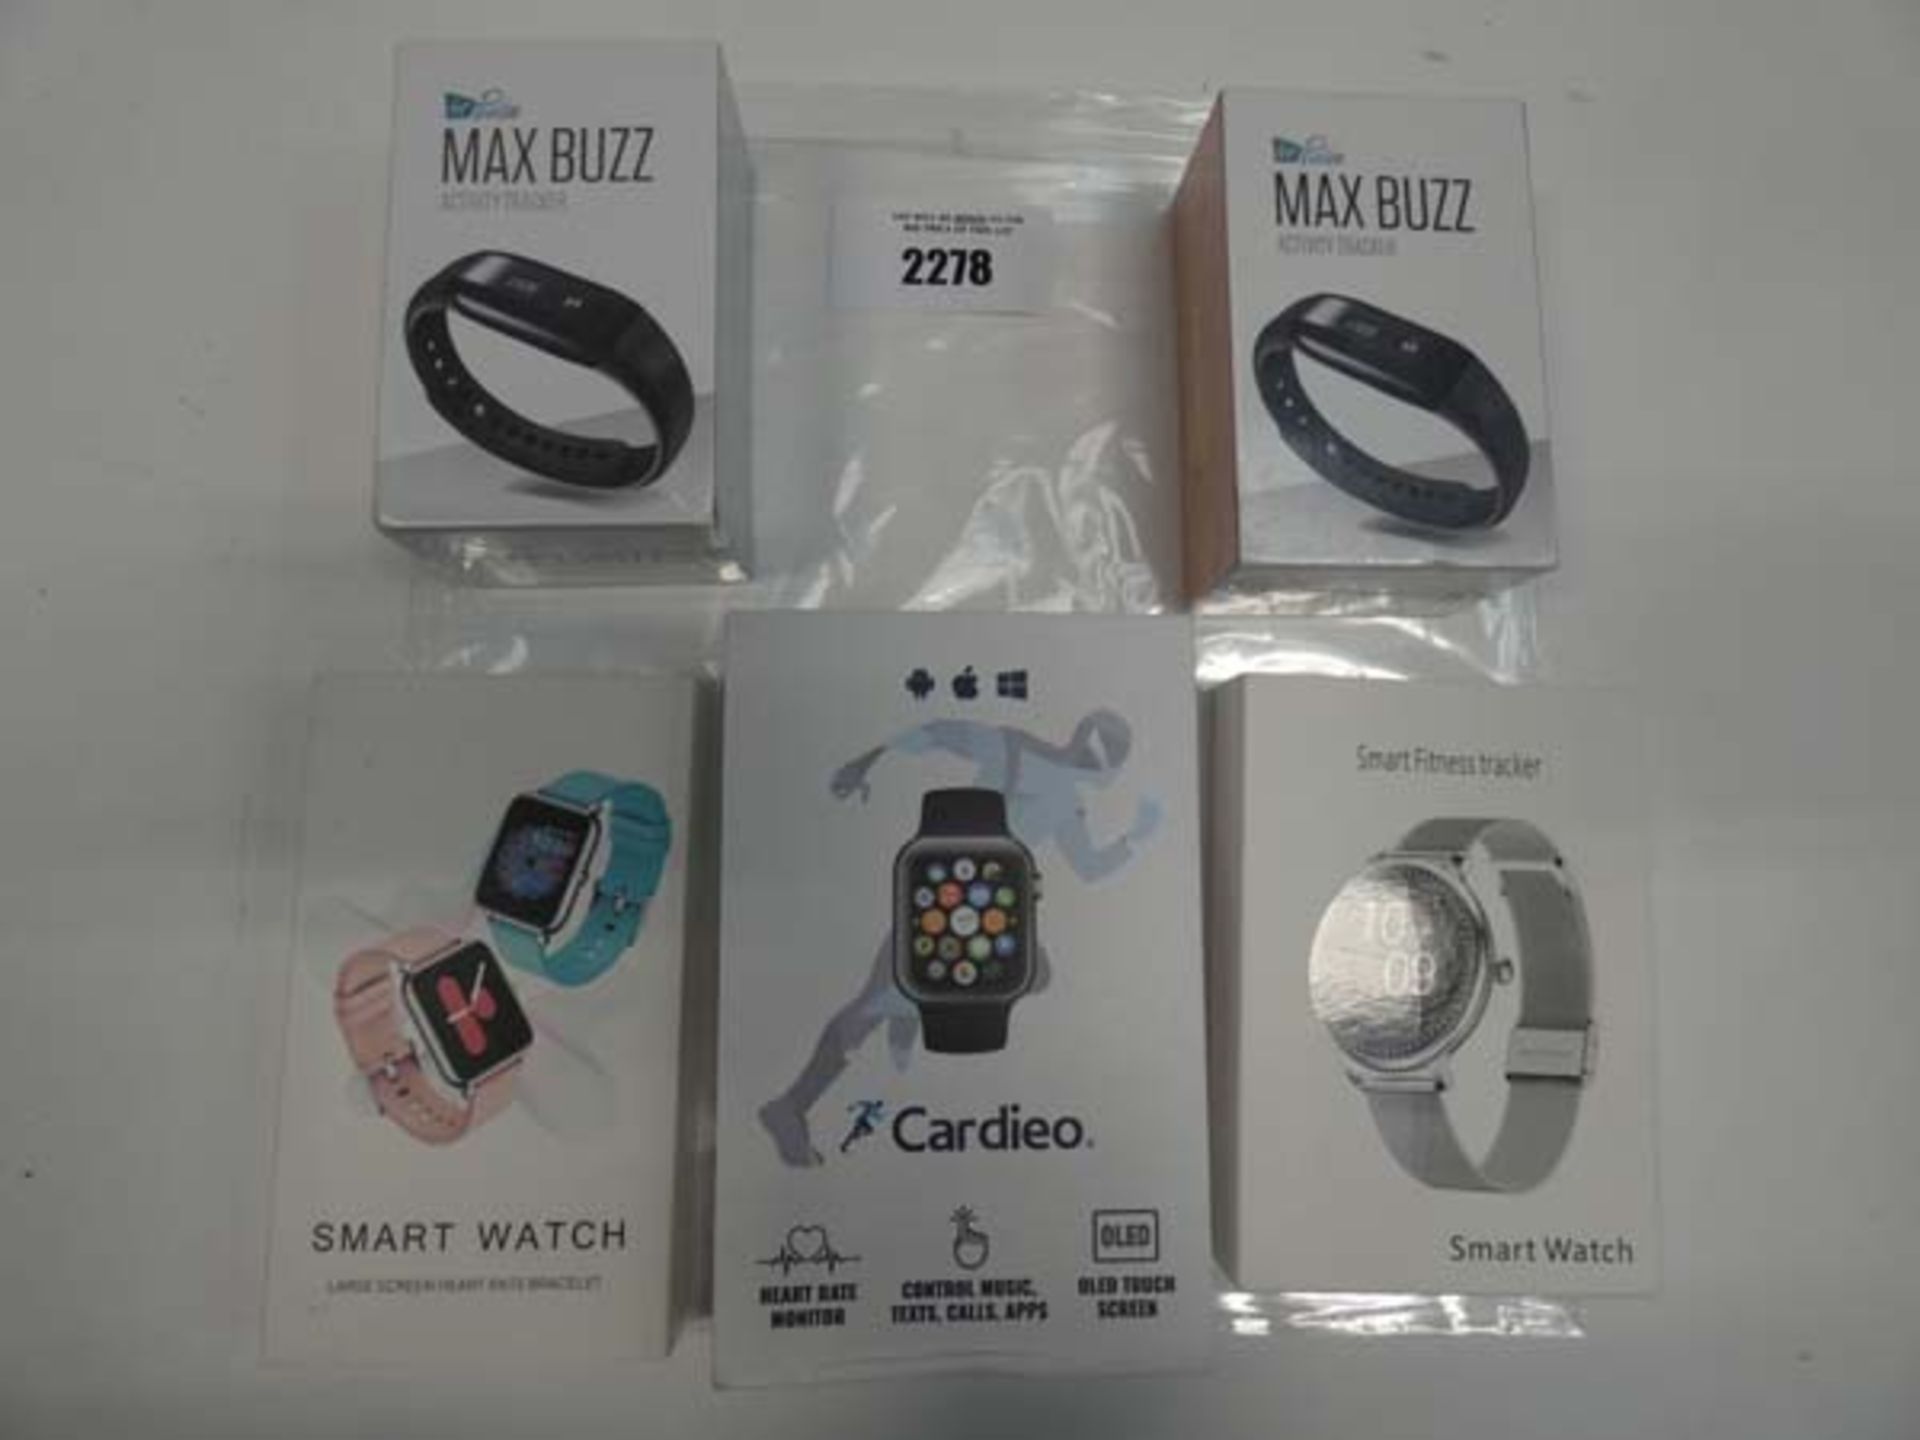 2x Max Buzz activity trackers, Cardieo smartwatch and 2 other smartwatches